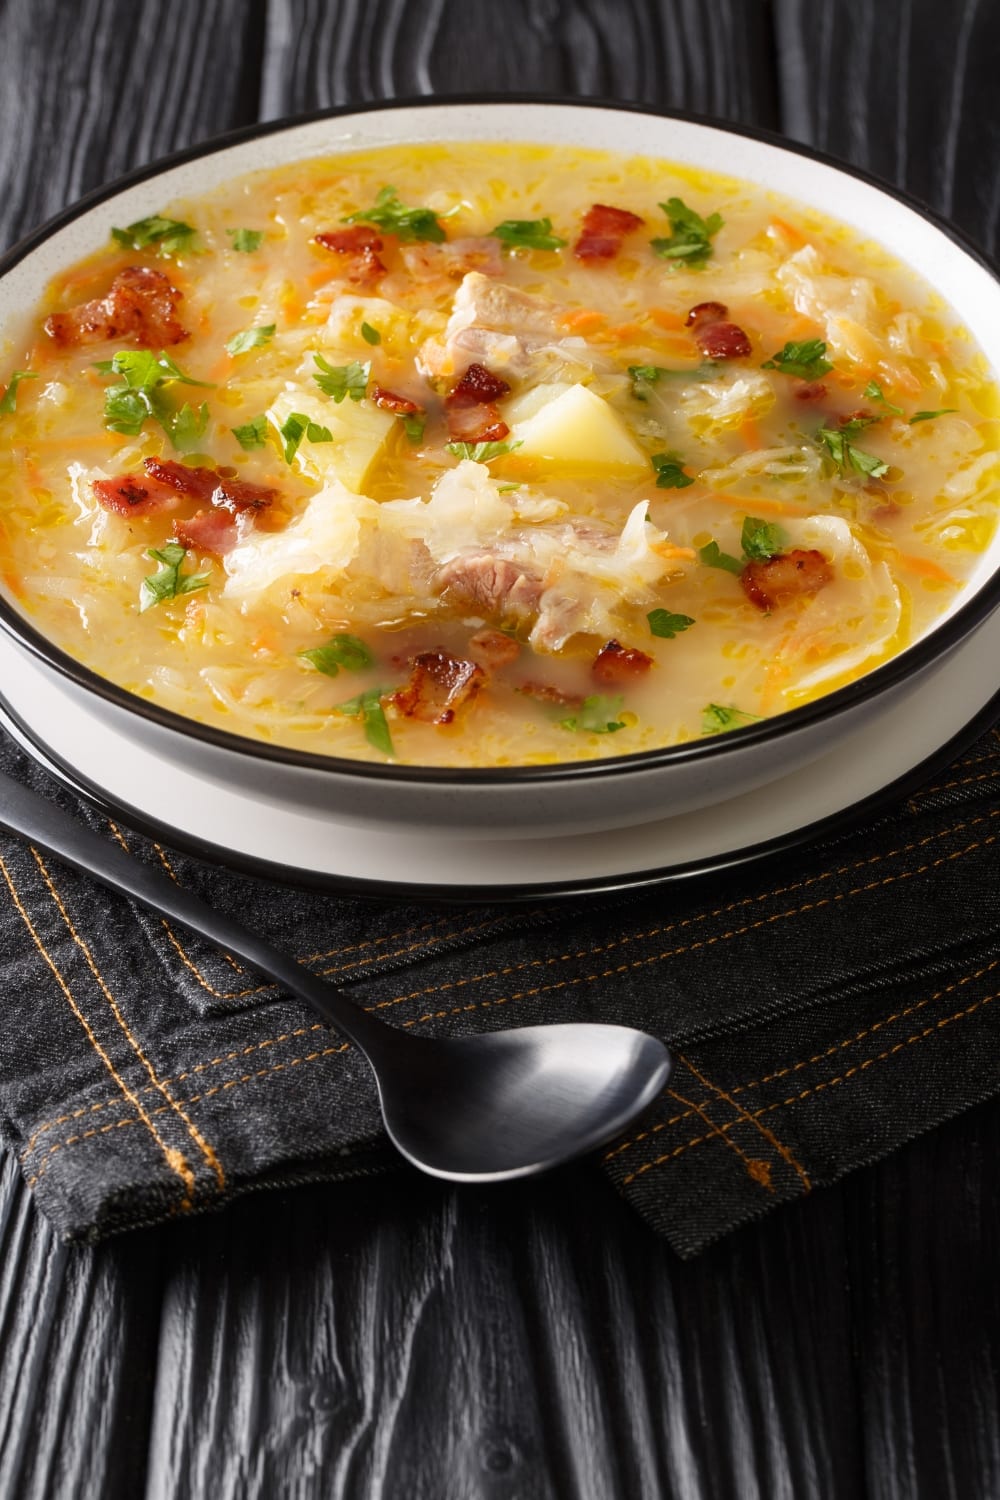 A Bowl of Polish Potato and Cabbage Soup with Bacon Bits and Chicken Meat, Garnished With Chopped Parsley Leaves